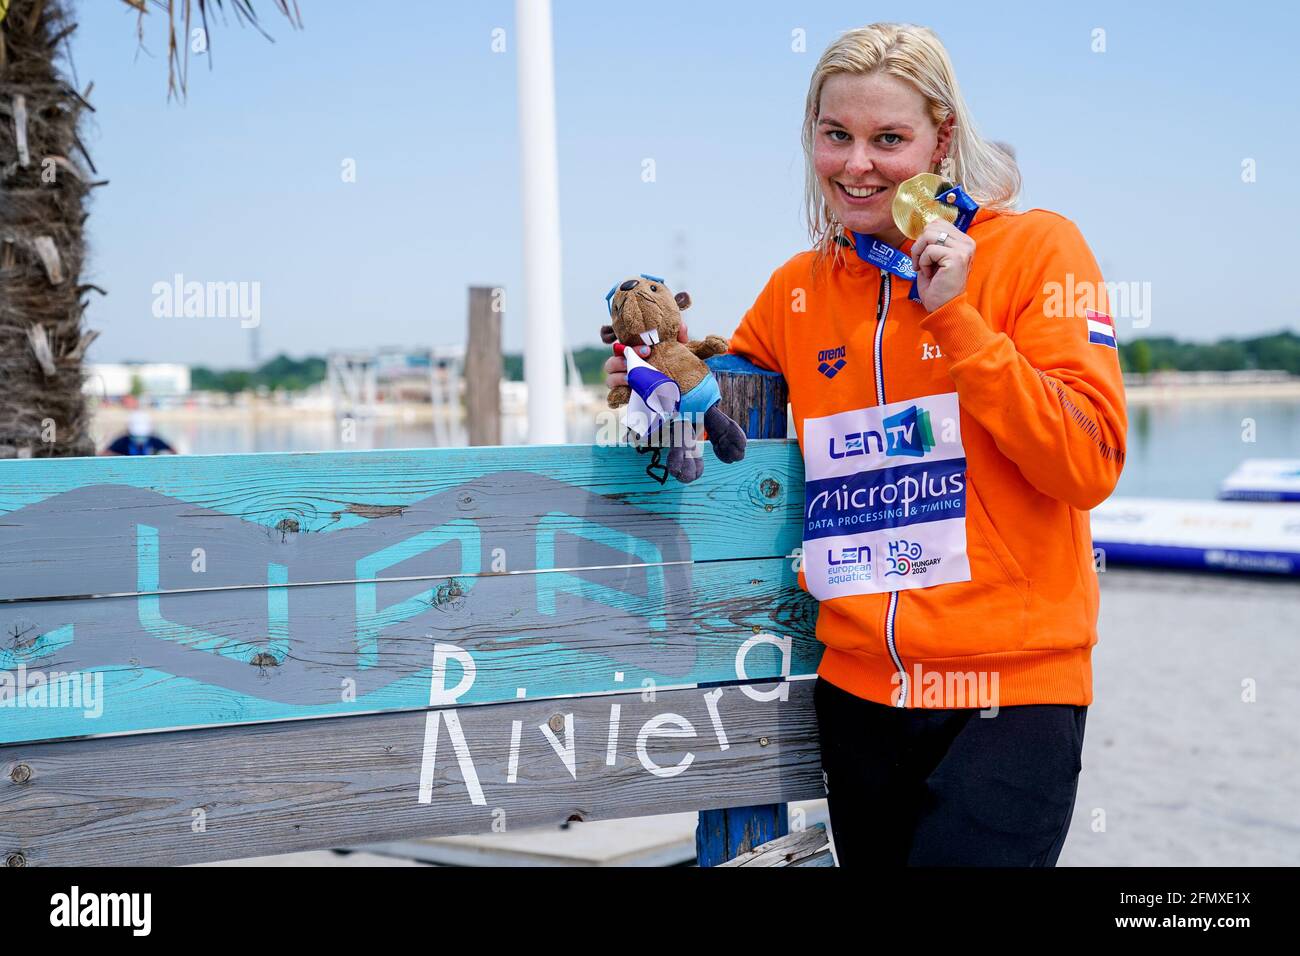 12-05-2021: Zwemmen: Europees Kampioenschap: Boedapest BUDAPEST, HUNGARY -  MAY 12: Sharon van Rouwendaal of the Netherlands celebrating 1st place  competing at the Women 5km during the LEN European Aquatics Championships  Open water